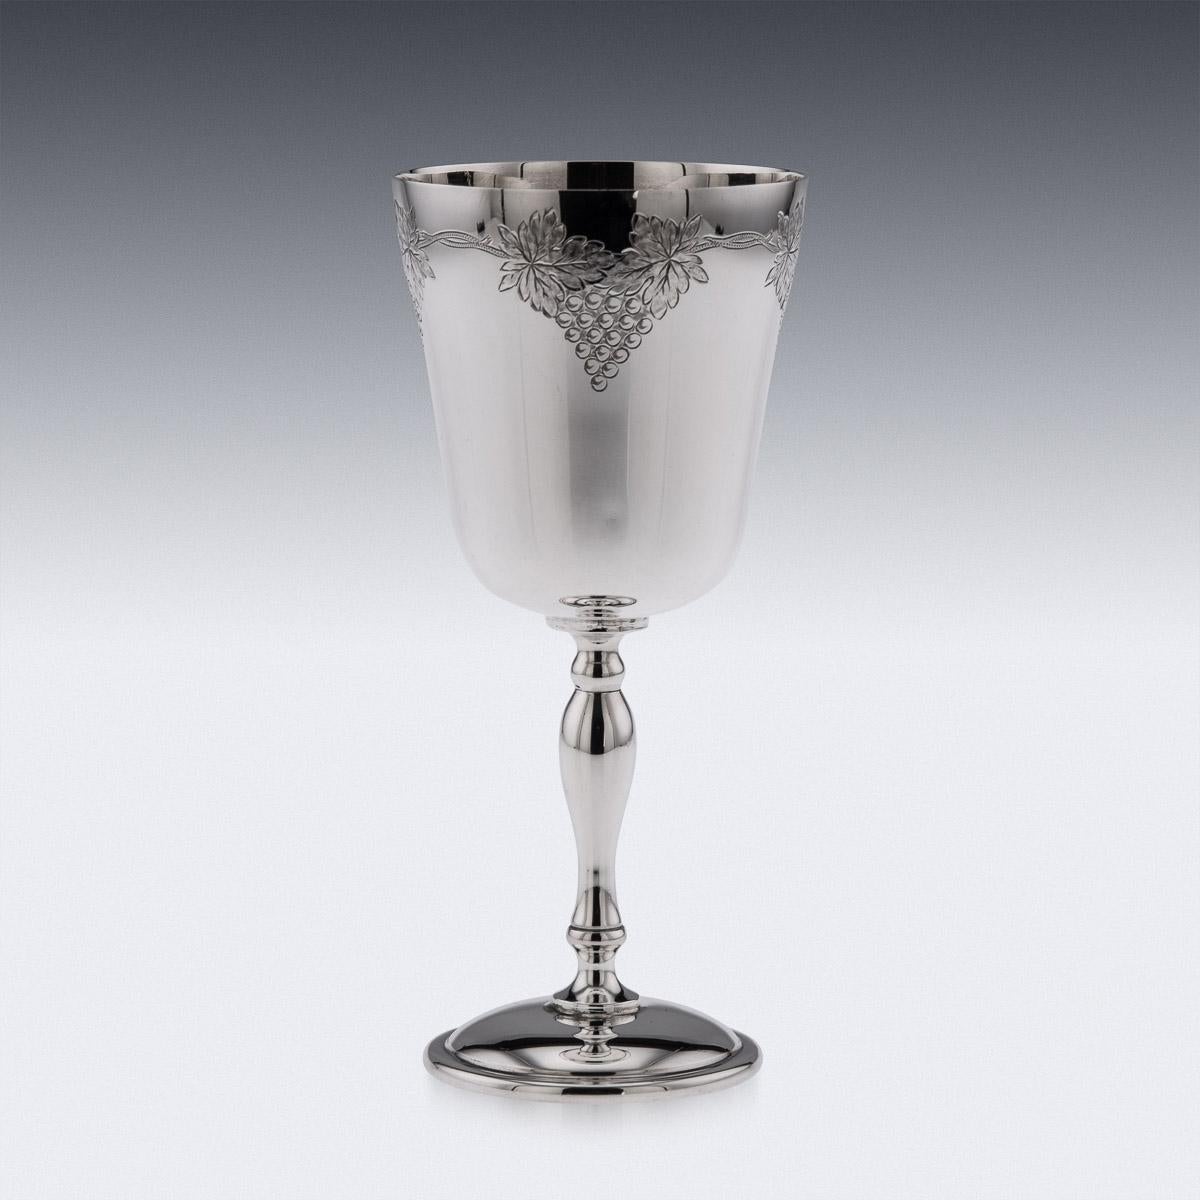 20th Century English silver set of 6 wine goblets, elegant size and weight, of traditional form, cast baluster shaped stem on a domed spreading foot, engraved with bunches of grapes and grapevine boarders.
Hallmarked English silver (925 Standard),